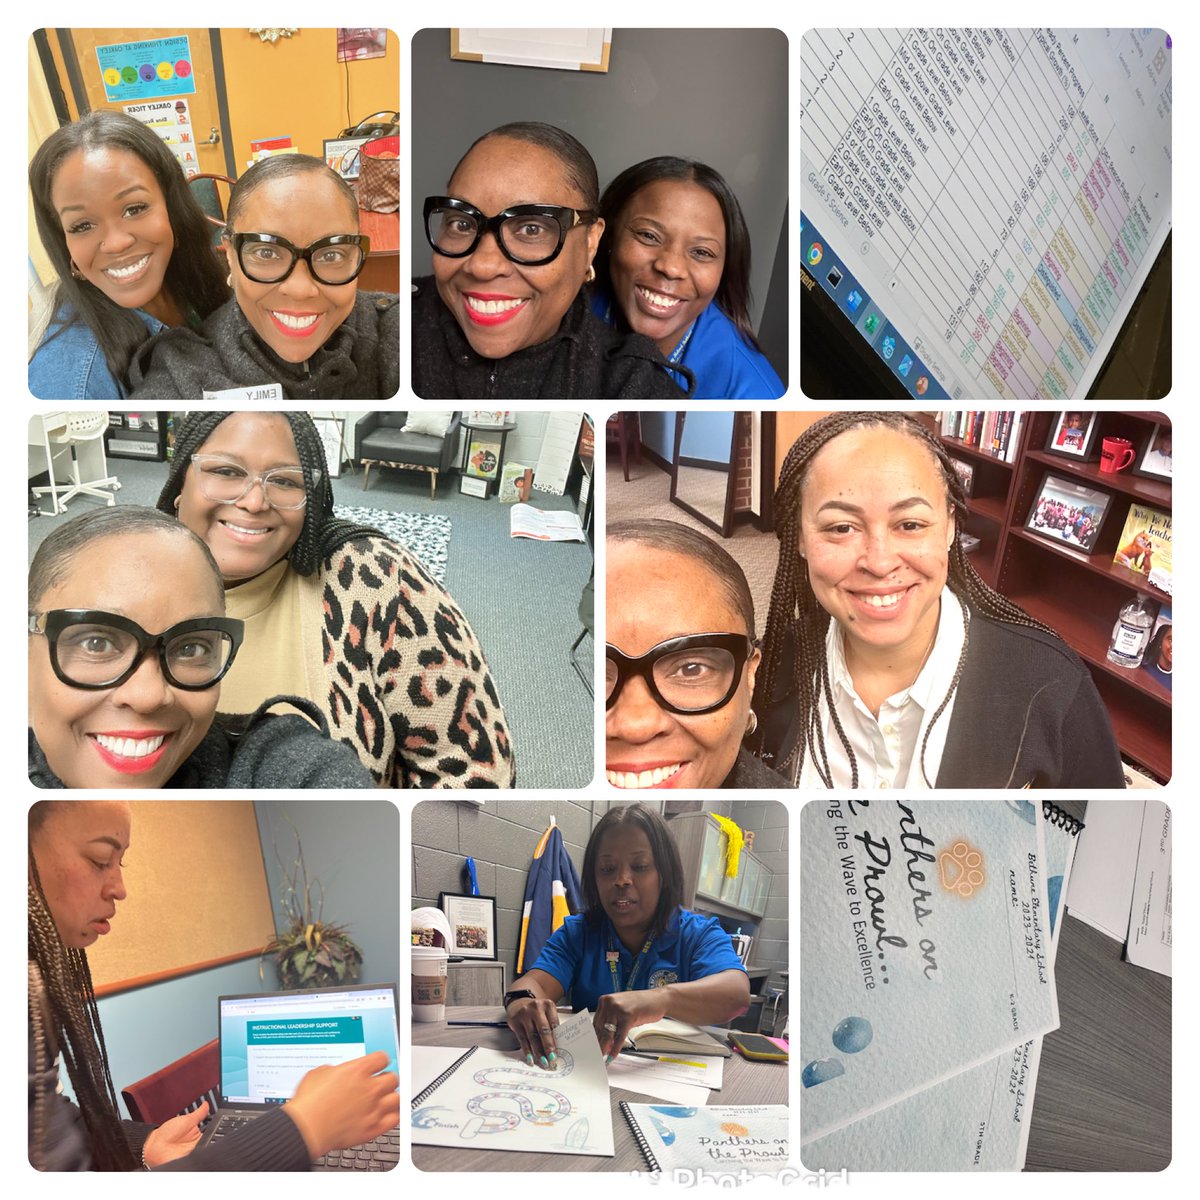 Today was a great day with these dynamic principals! @PrincipalsCtr #LeadershipDevelopment #Coaching @FultonCoSchools @DionneCspeaks #leadershipcoaching #DataReview #DevelopingTeams #FinishingStrong @DrEmilyAMassey 🎉